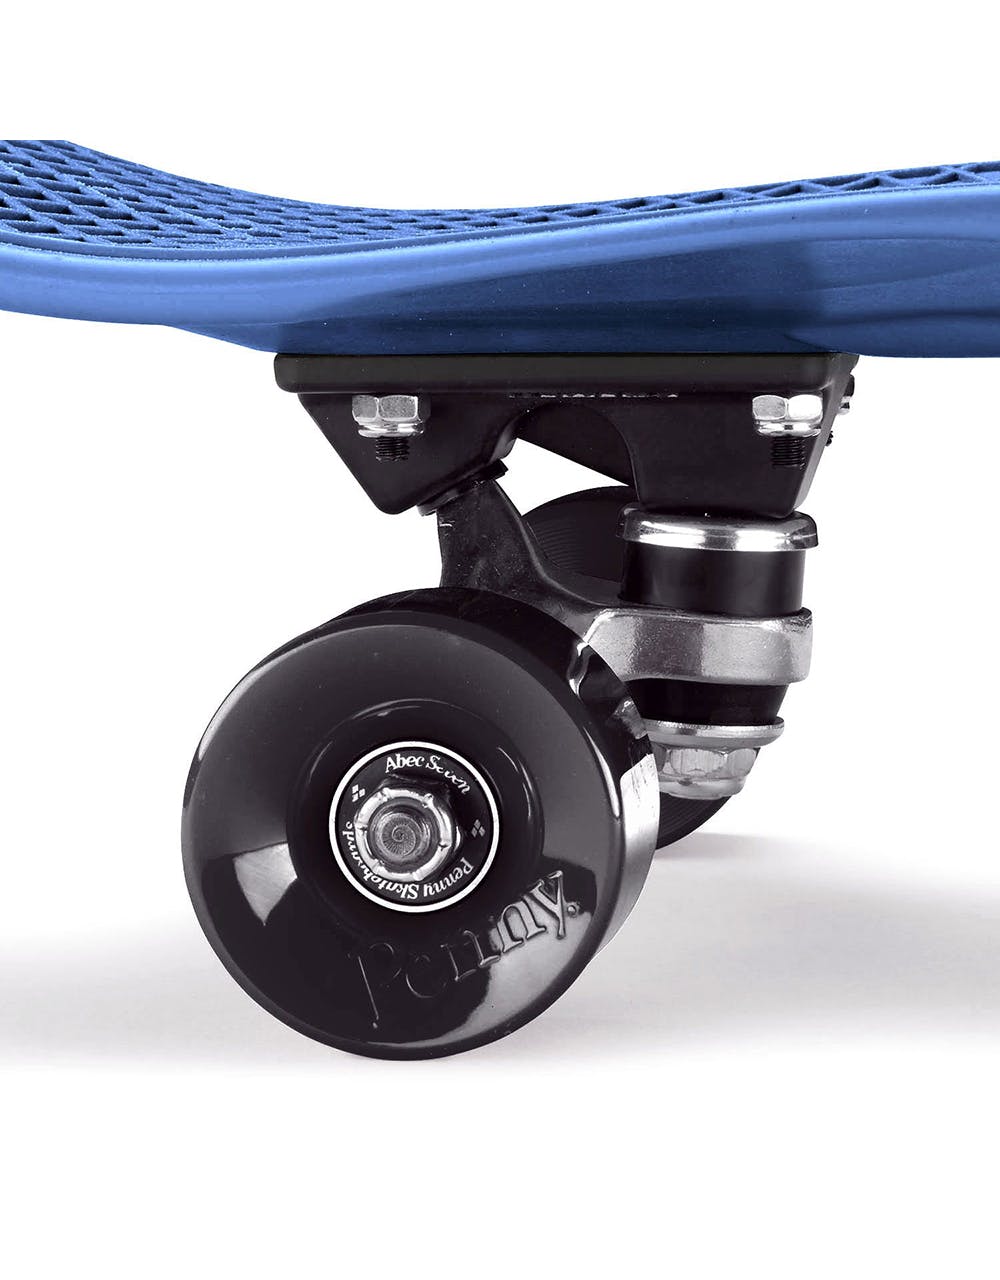 Penny Skateboards Classic Concave Cruiser - 32" - Midnight